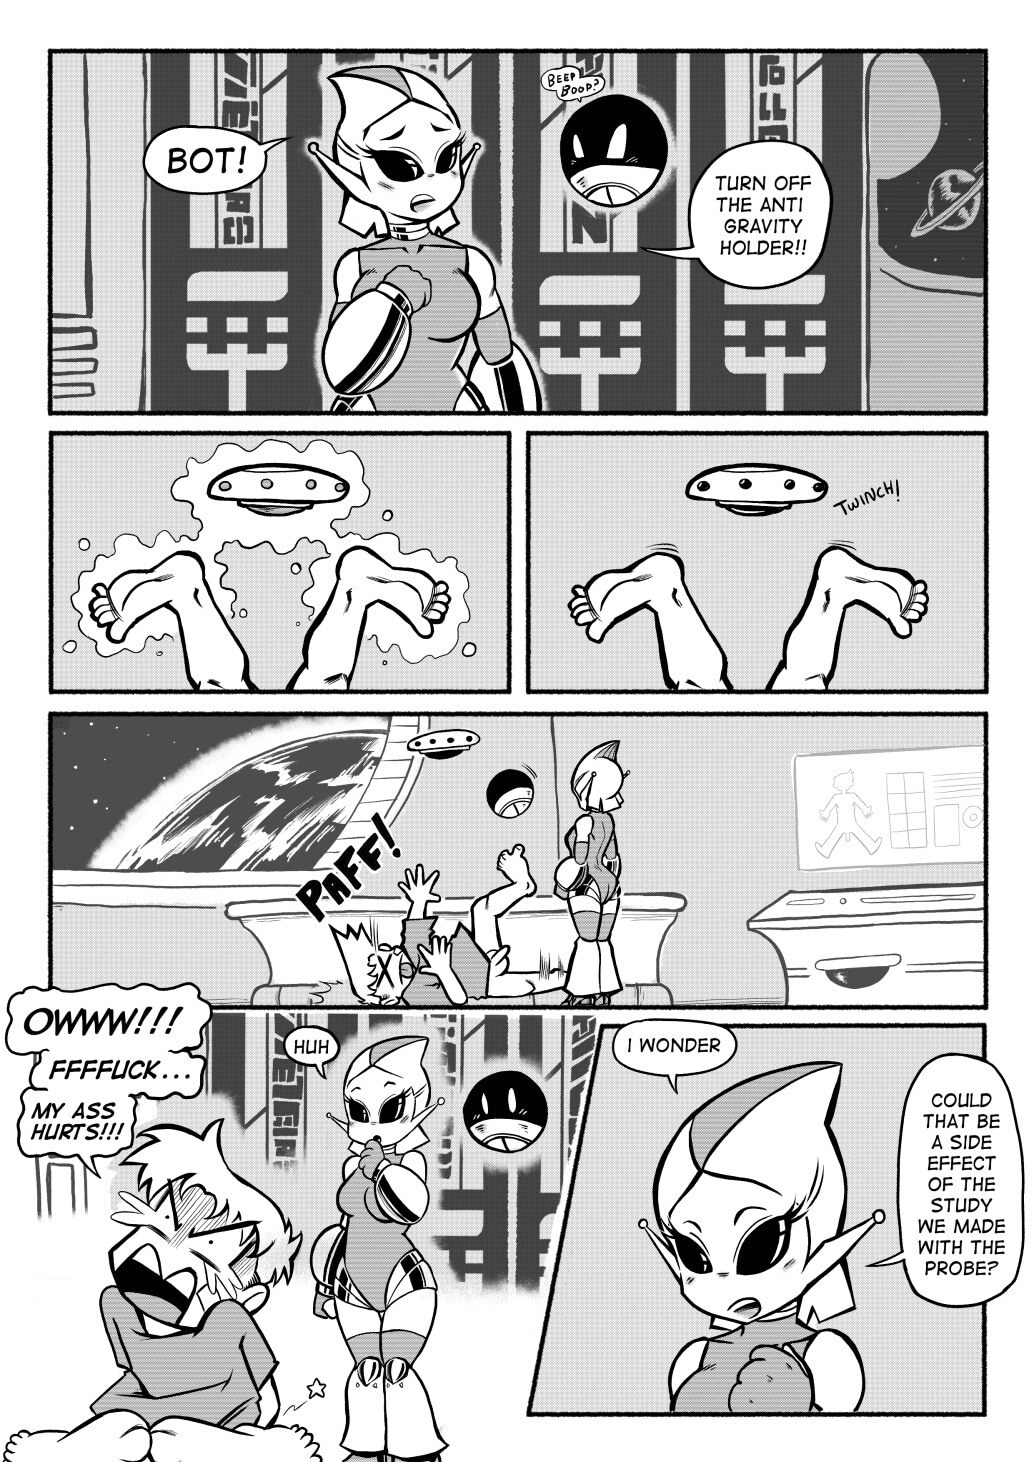 Abducted! - Mr.E - Page 7